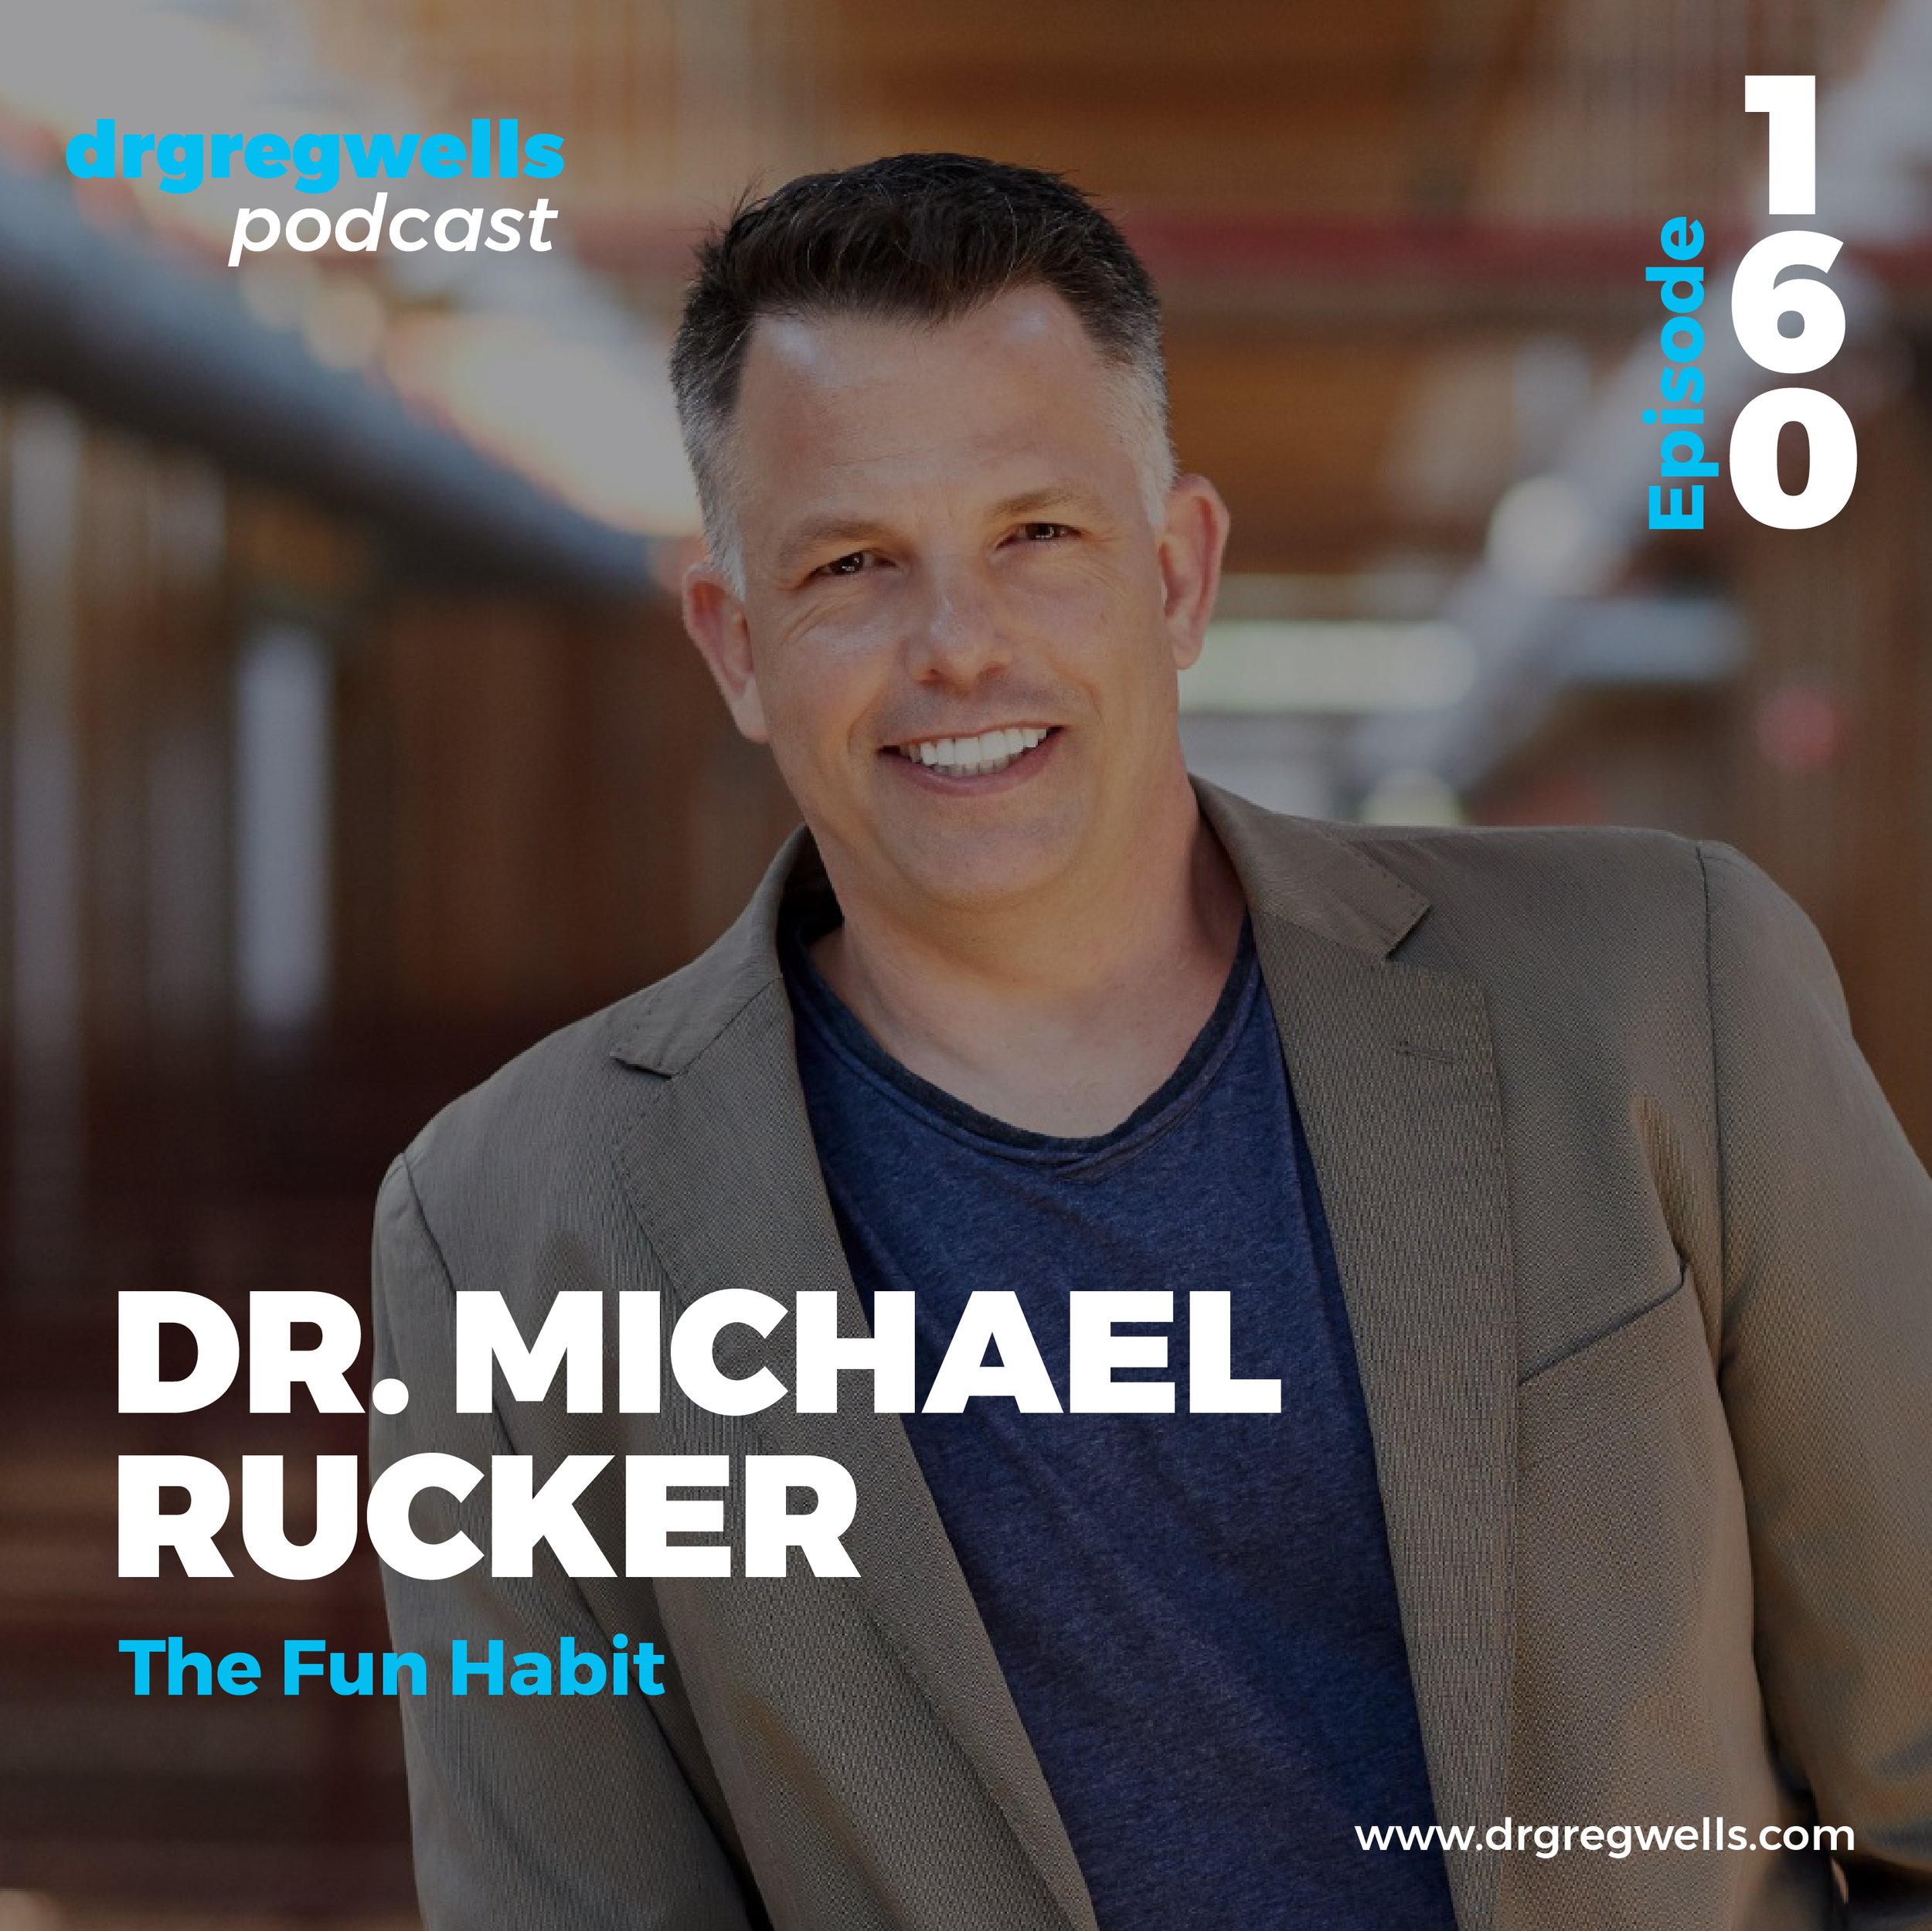 Dr Greg Wells Podcast Guest EP 160-01.jpg